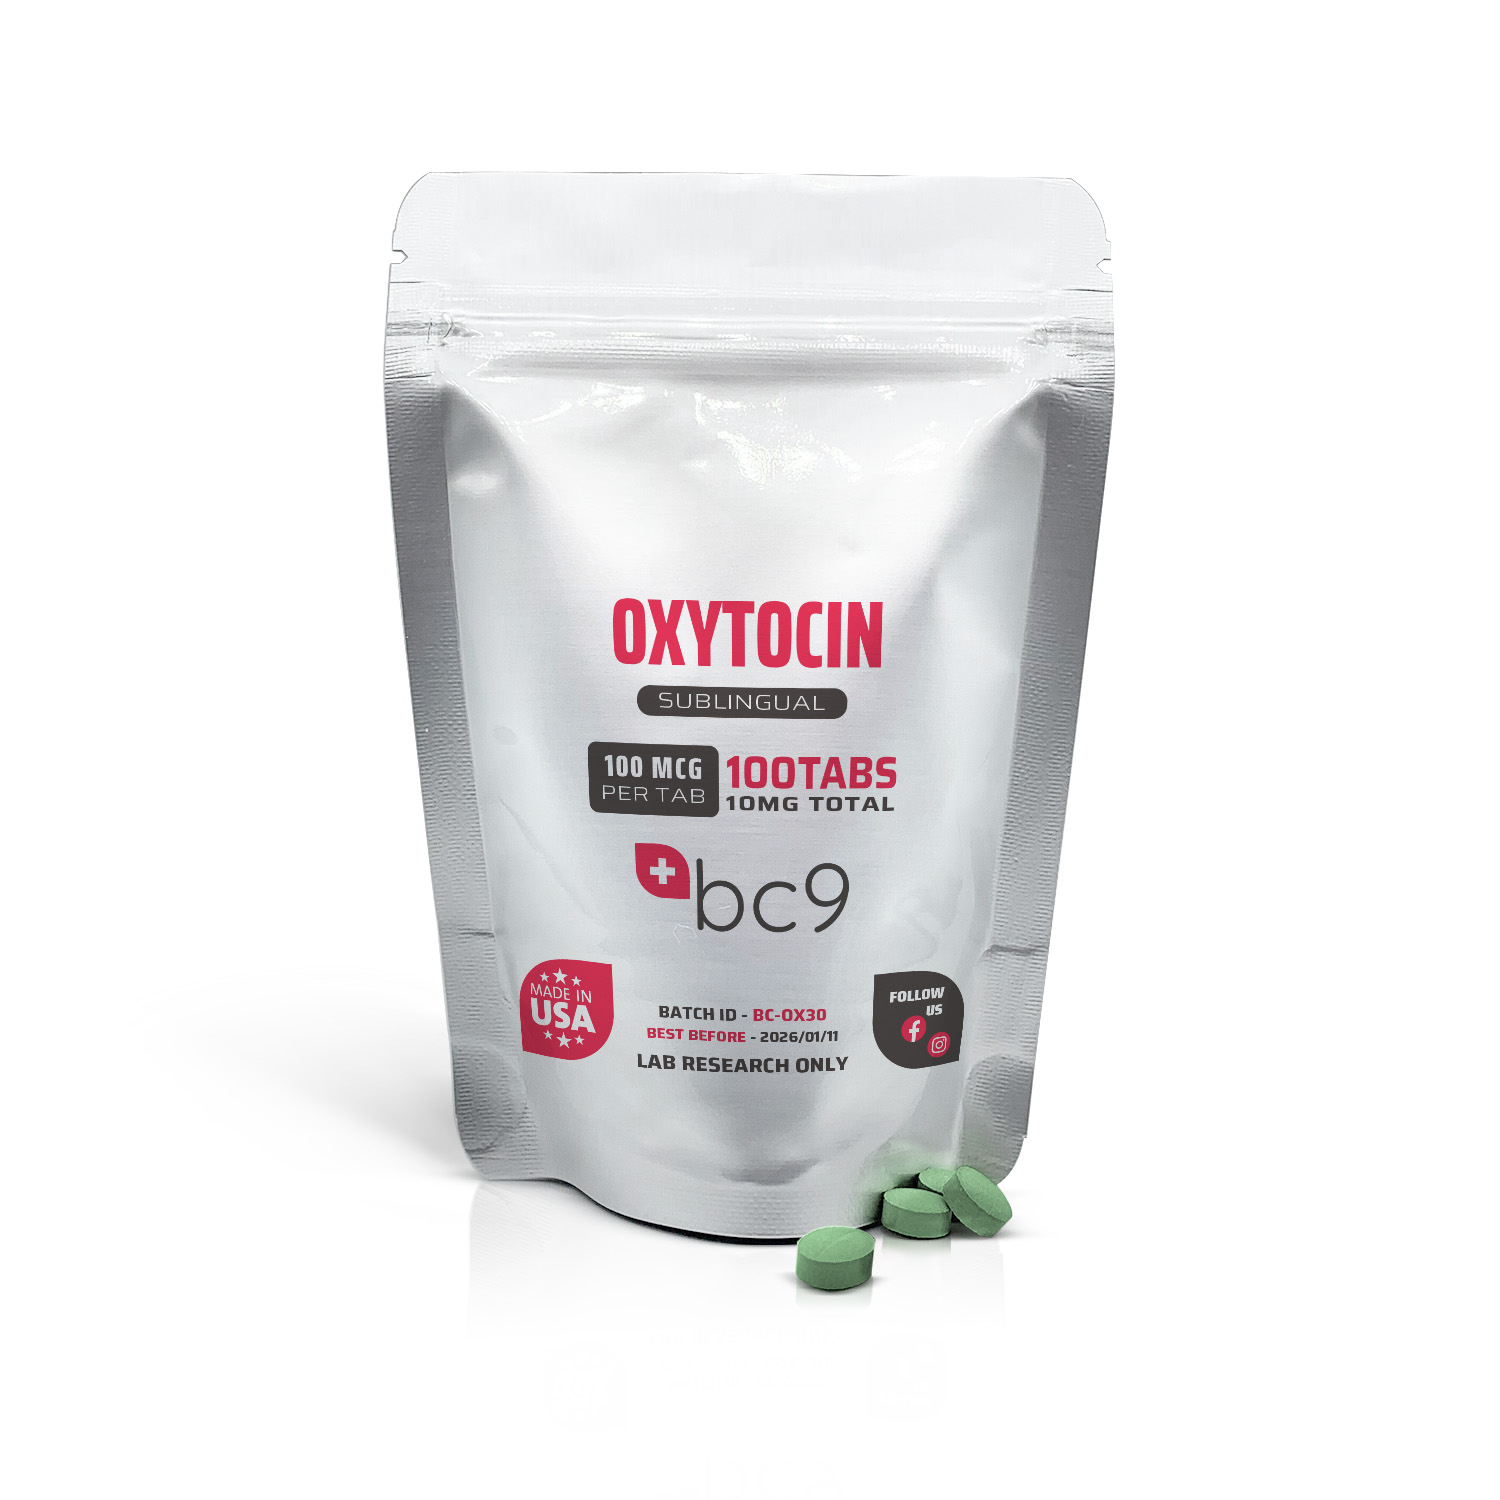 Oxytocin Peptide For Sale in USA | 3rd Party Tested | BC9.org